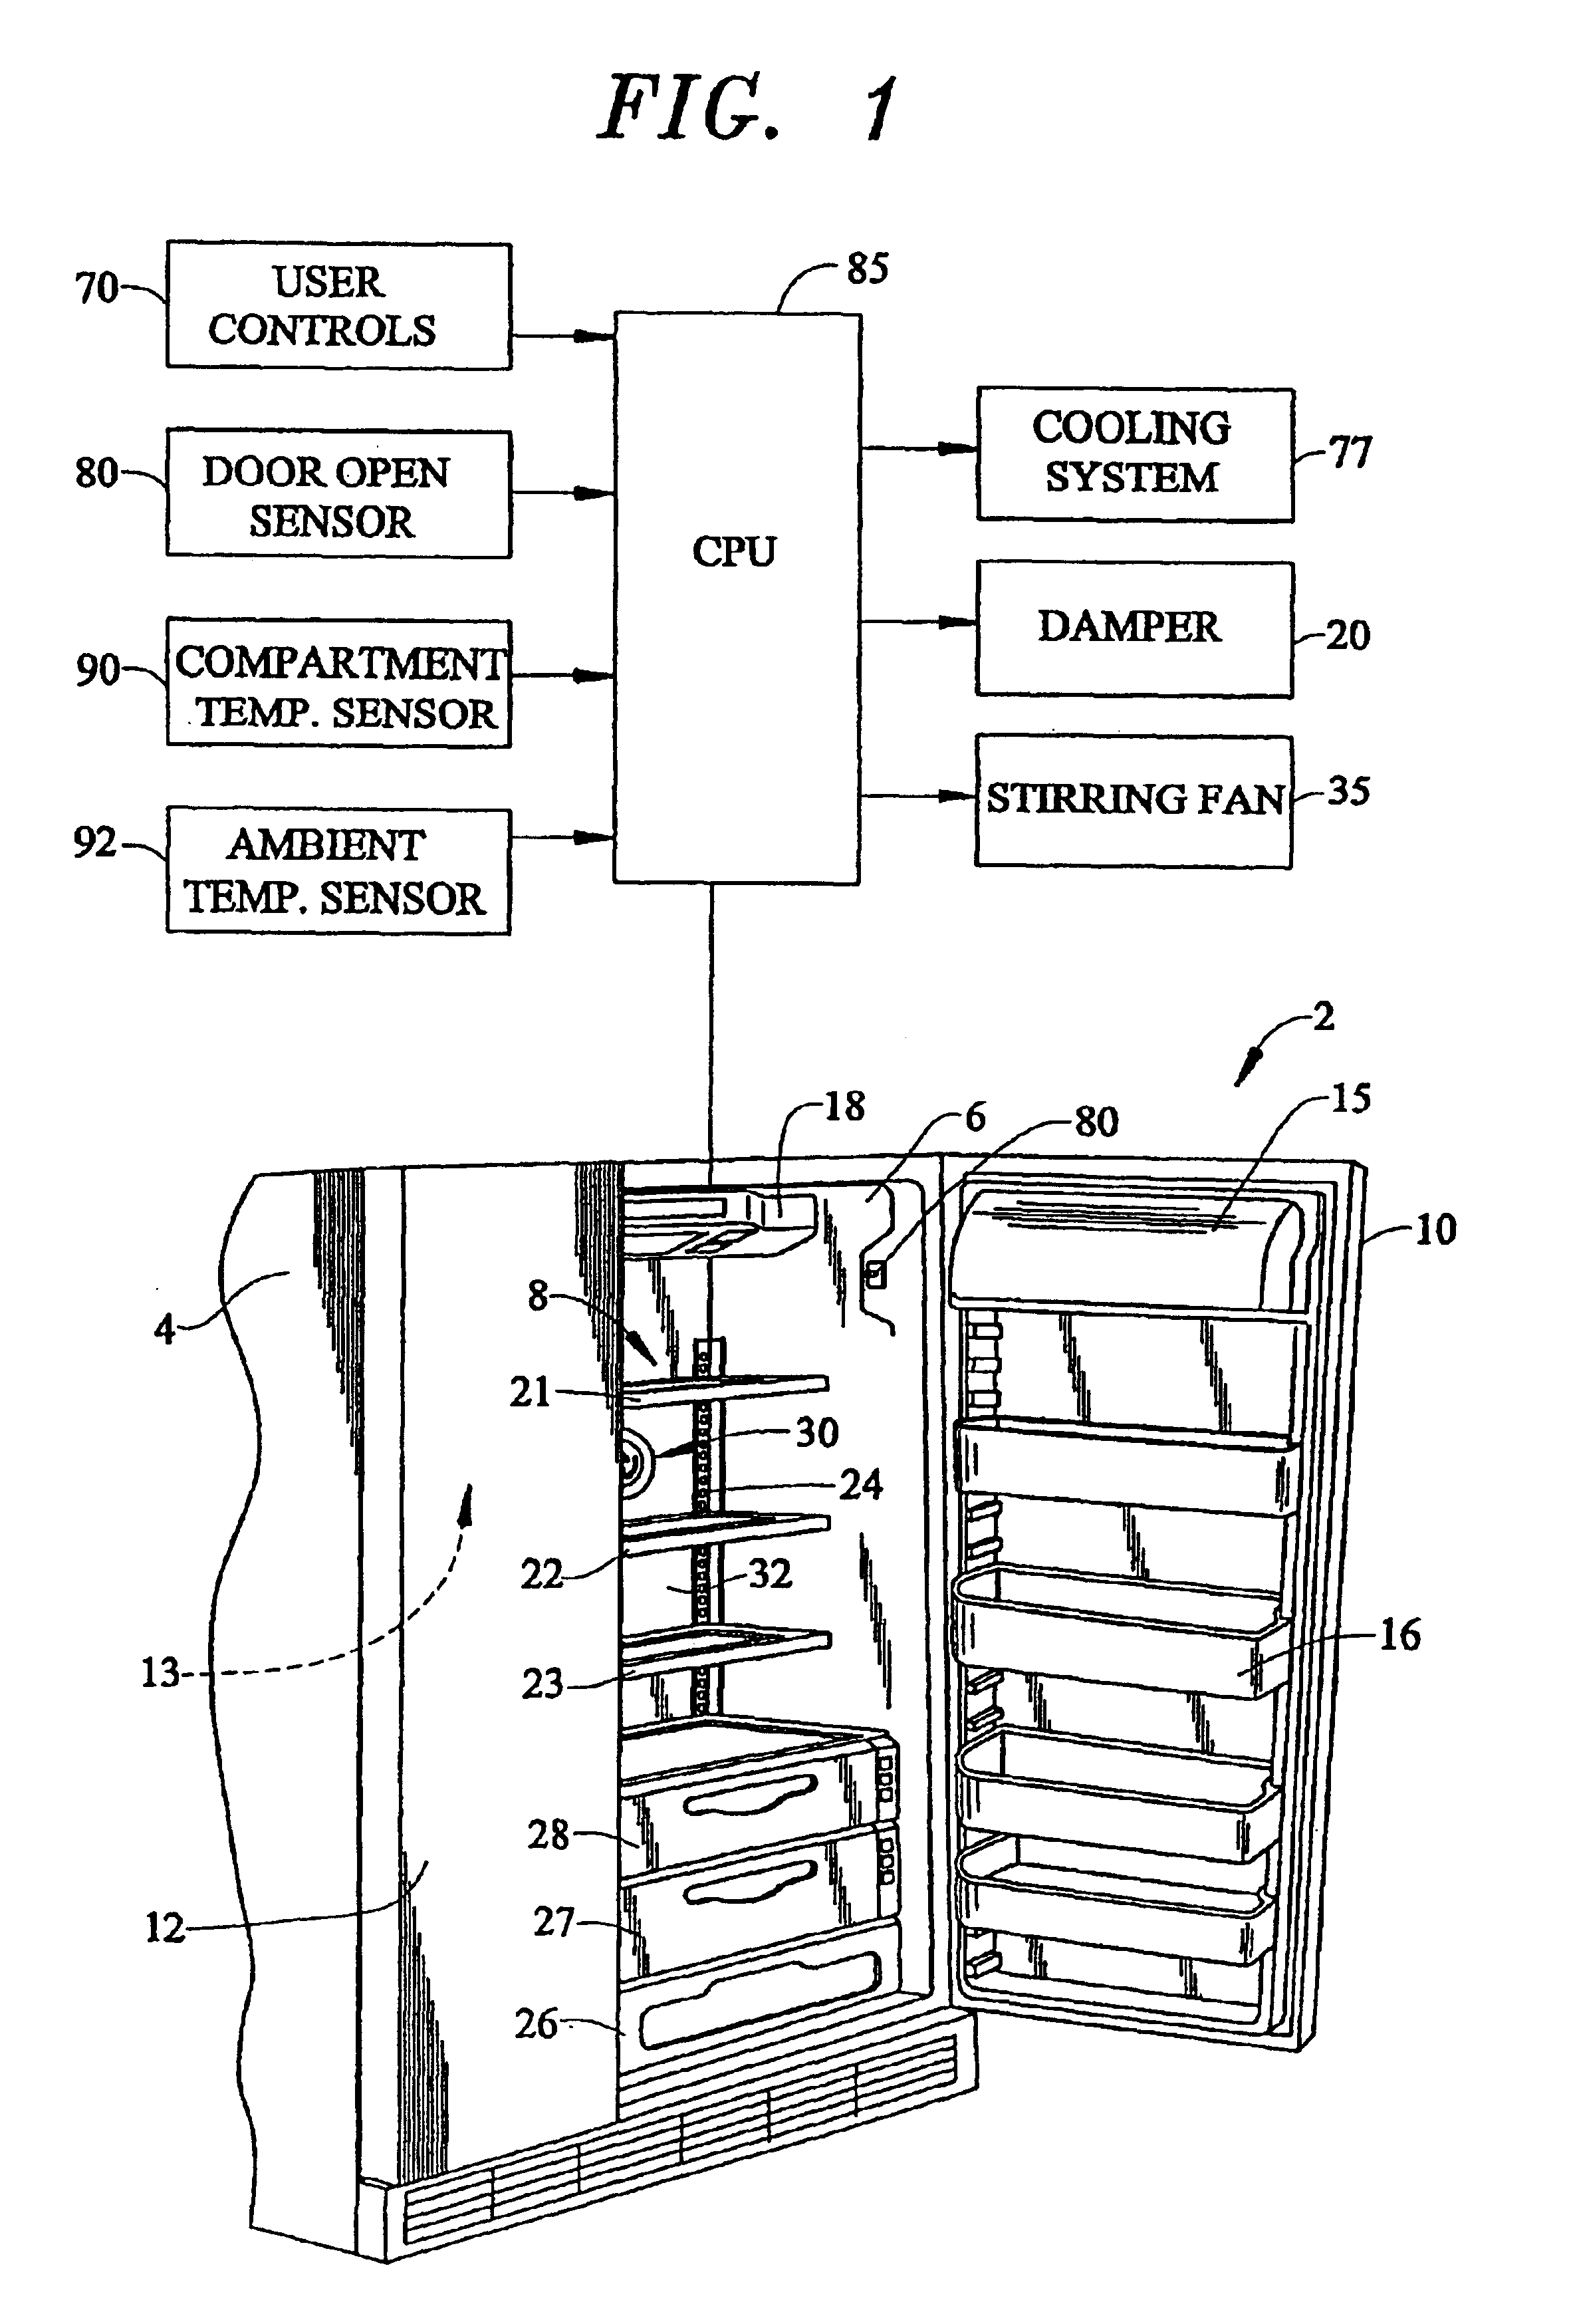 Air circulation and filtration system for a refrigerator